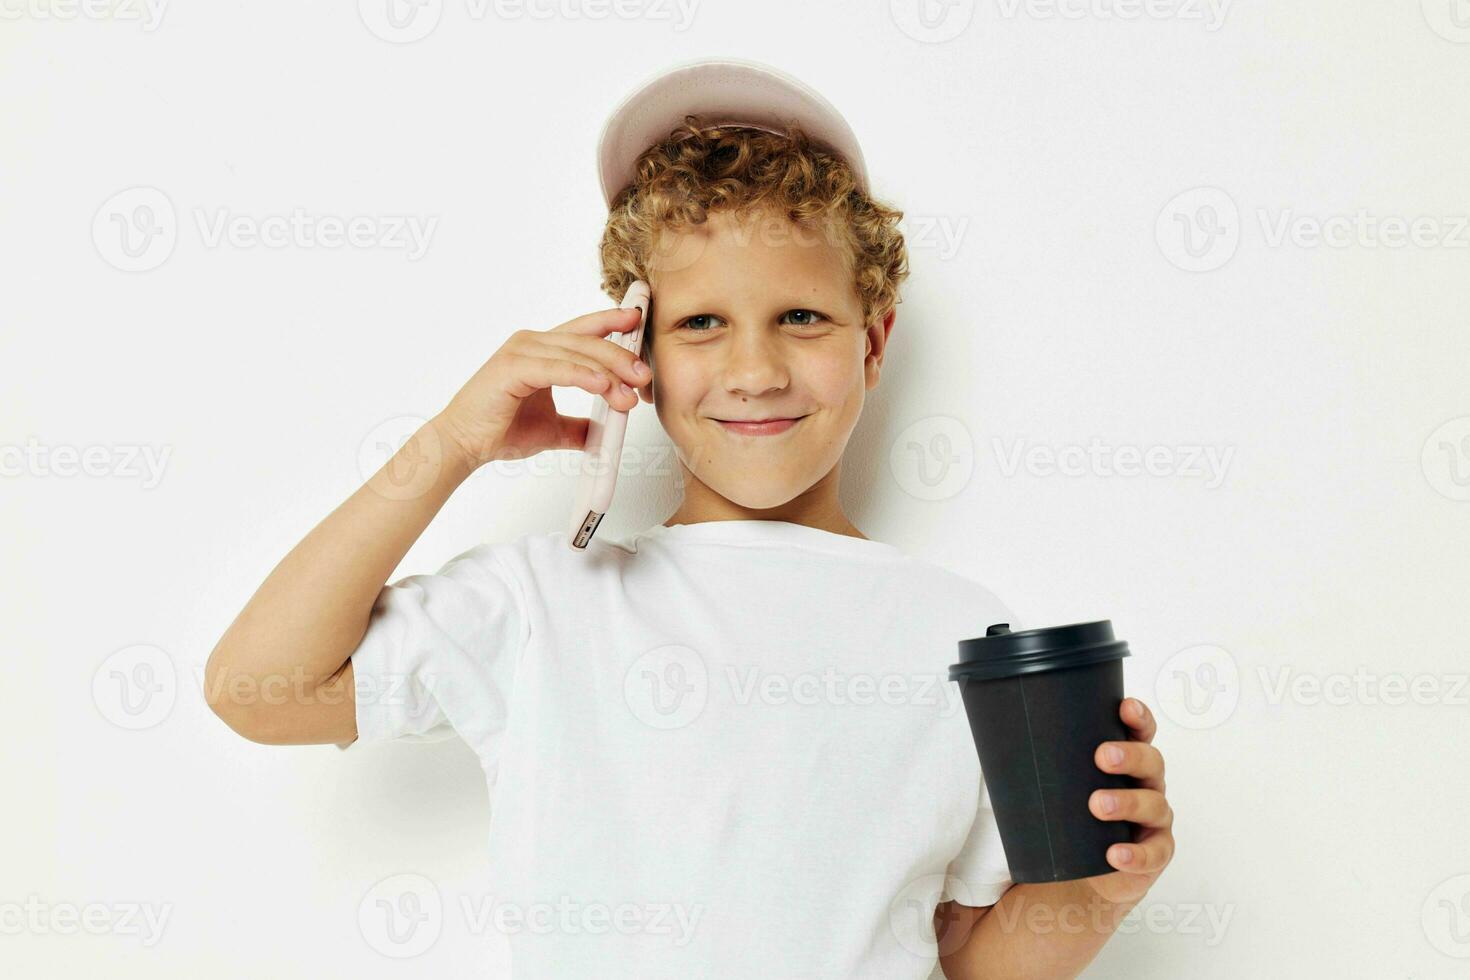 Cute little boy what kind of drink is the phone in hand communication light background unaltered photo